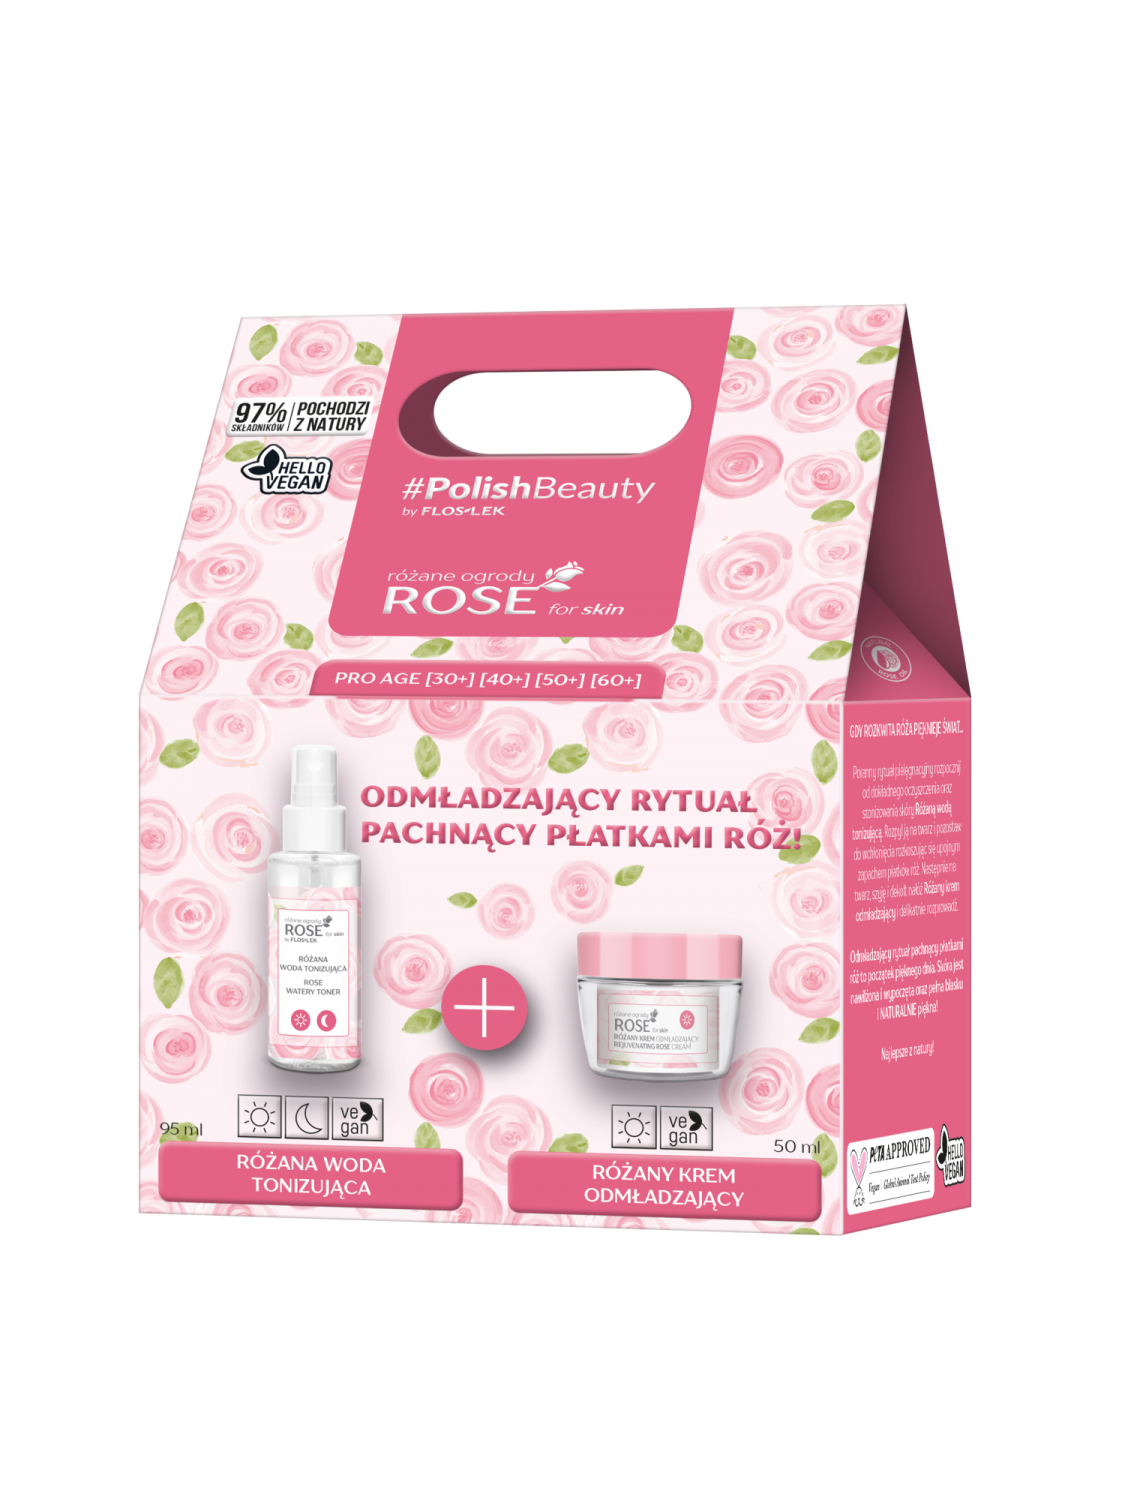 ROSE for skin PRO AGE CARE KIT by Floslek